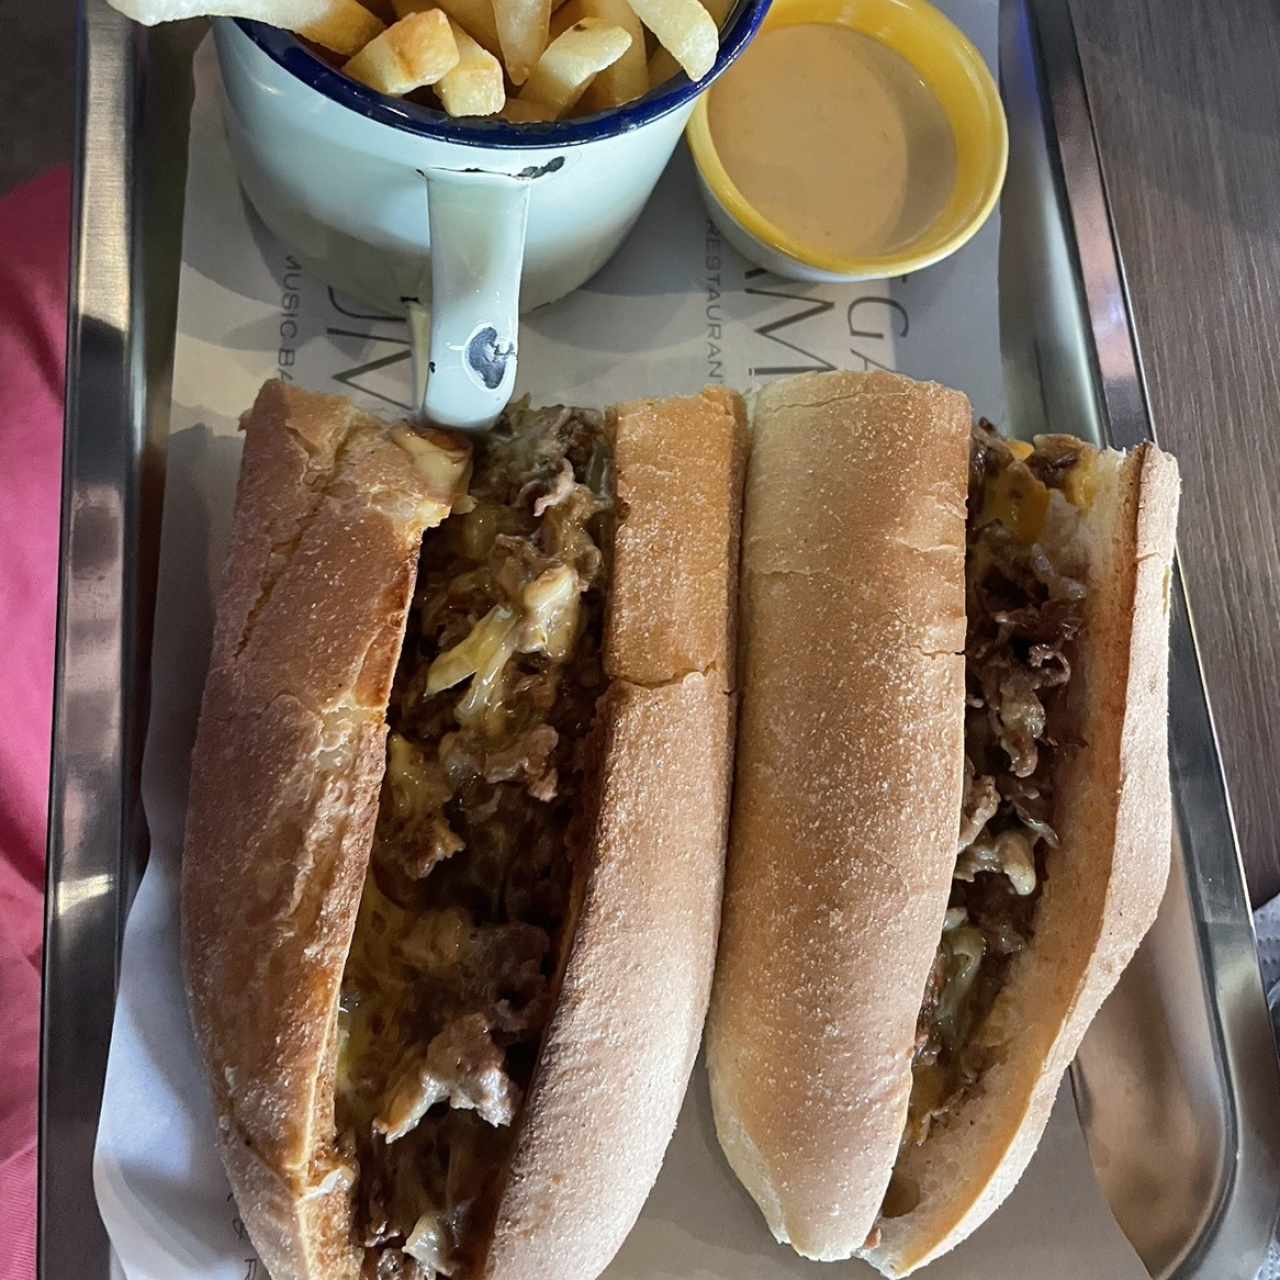 Principales - Philly cheesesteak